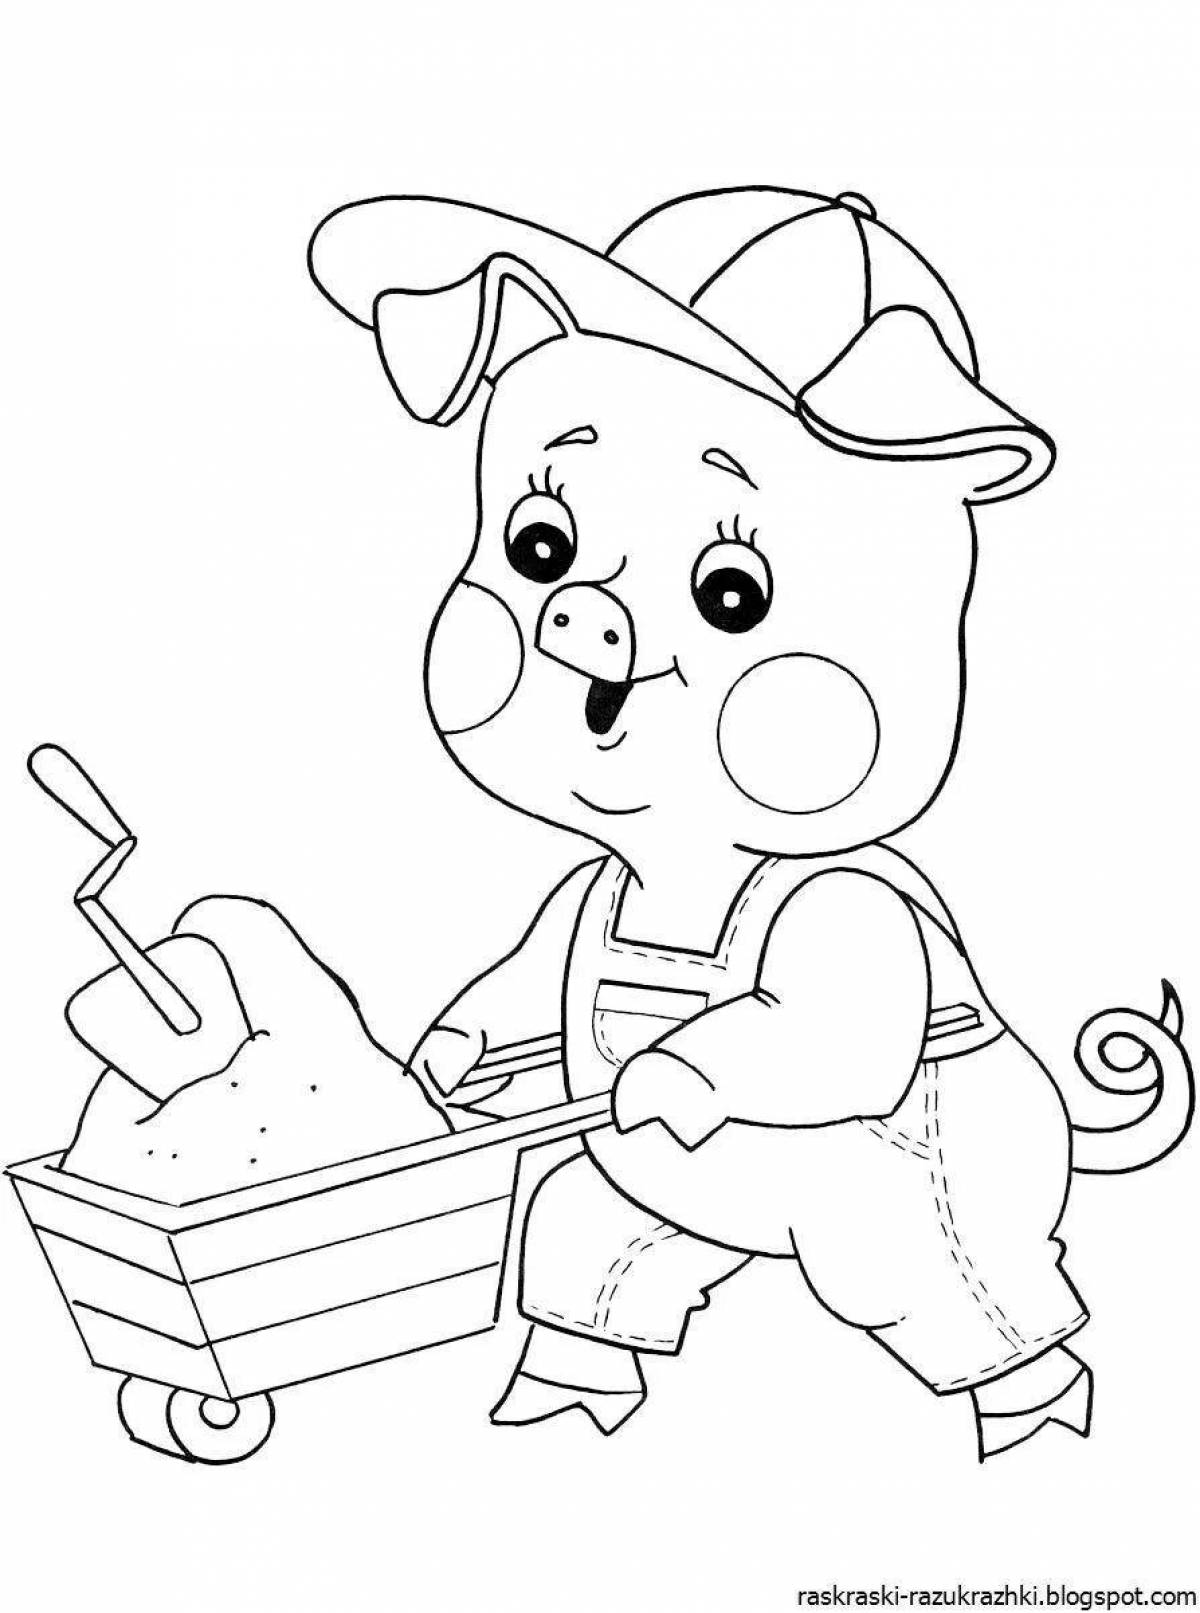 Exotic coloring pages heroes of fairy tales